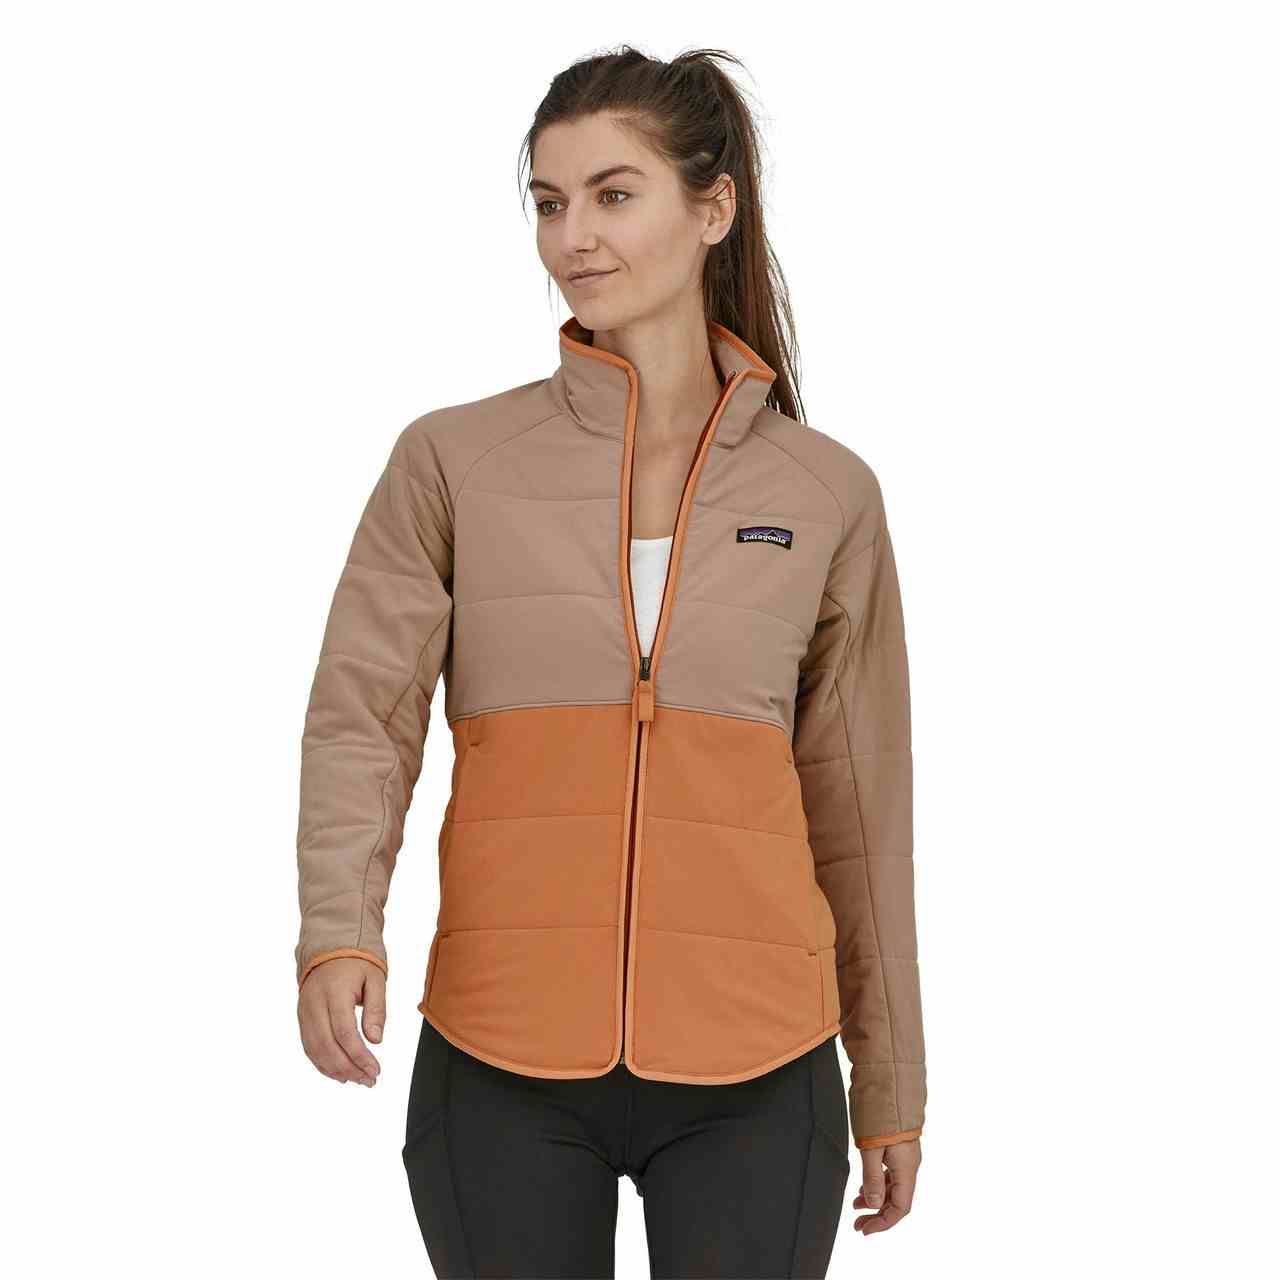 Pack In Jacket Toasted Peach